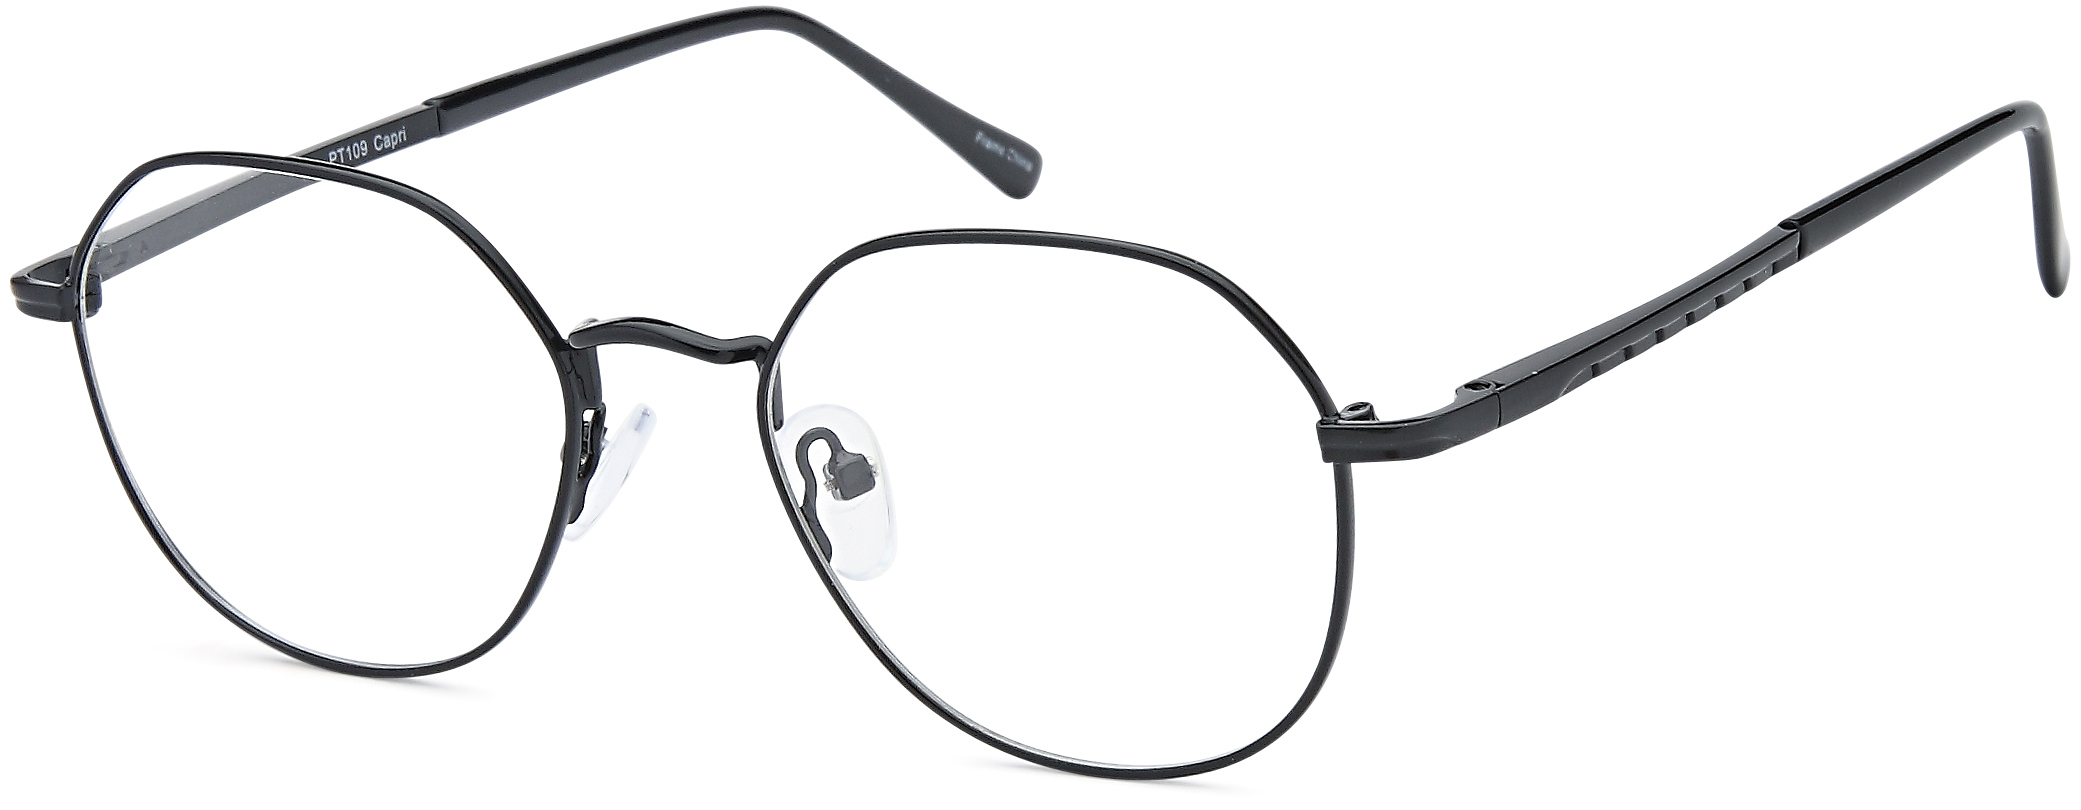 Picture of Peachtree Eyeglasses PT109